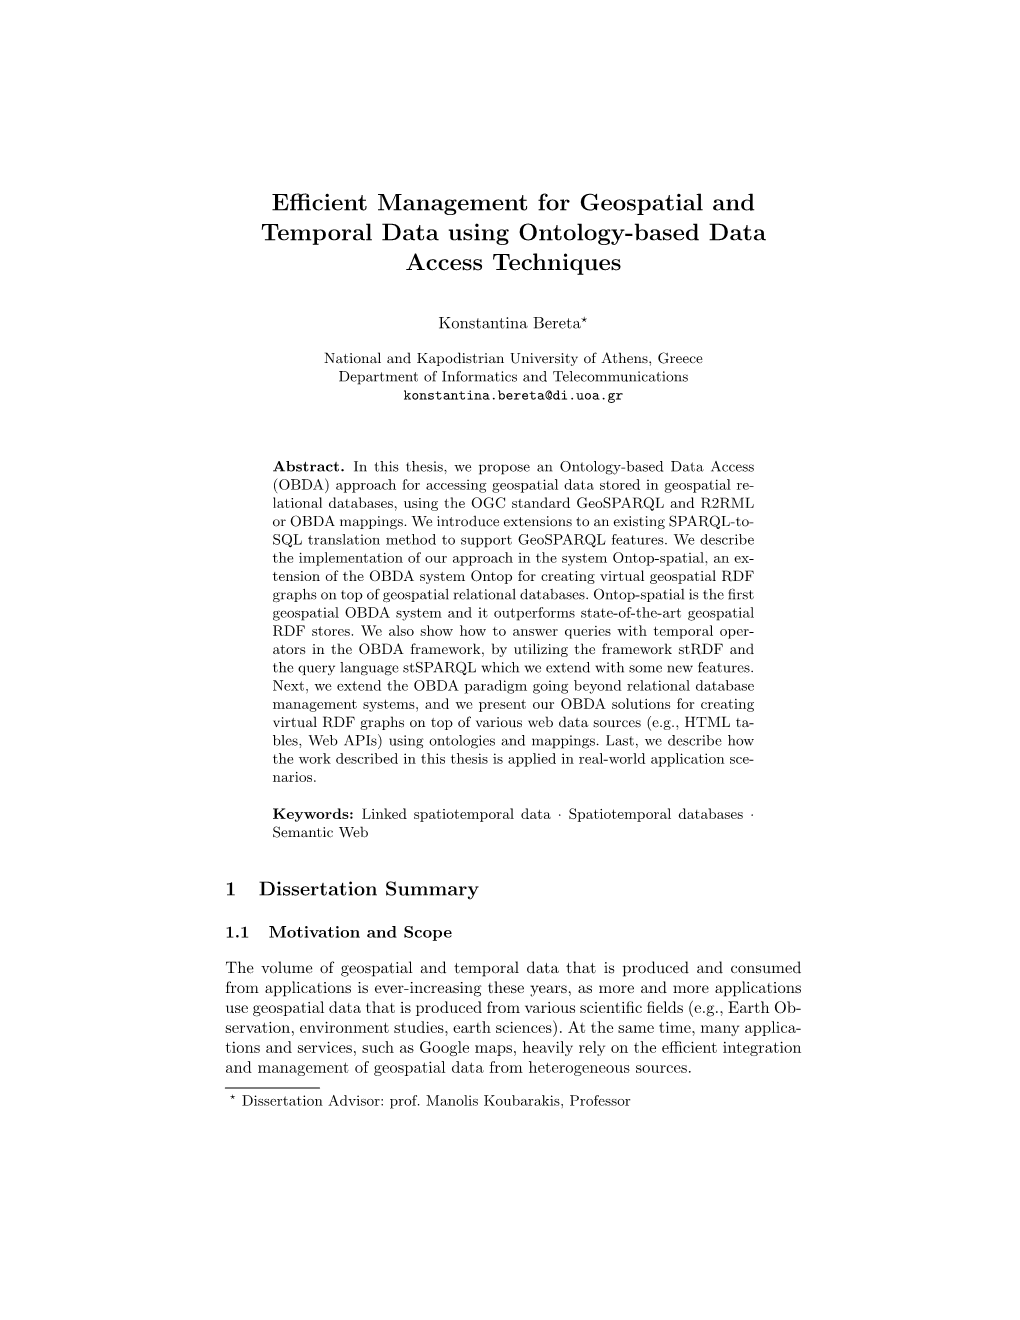 Efficient Management for Geospatial and Temporal Data Using Ontology-Based Data Access Techniques